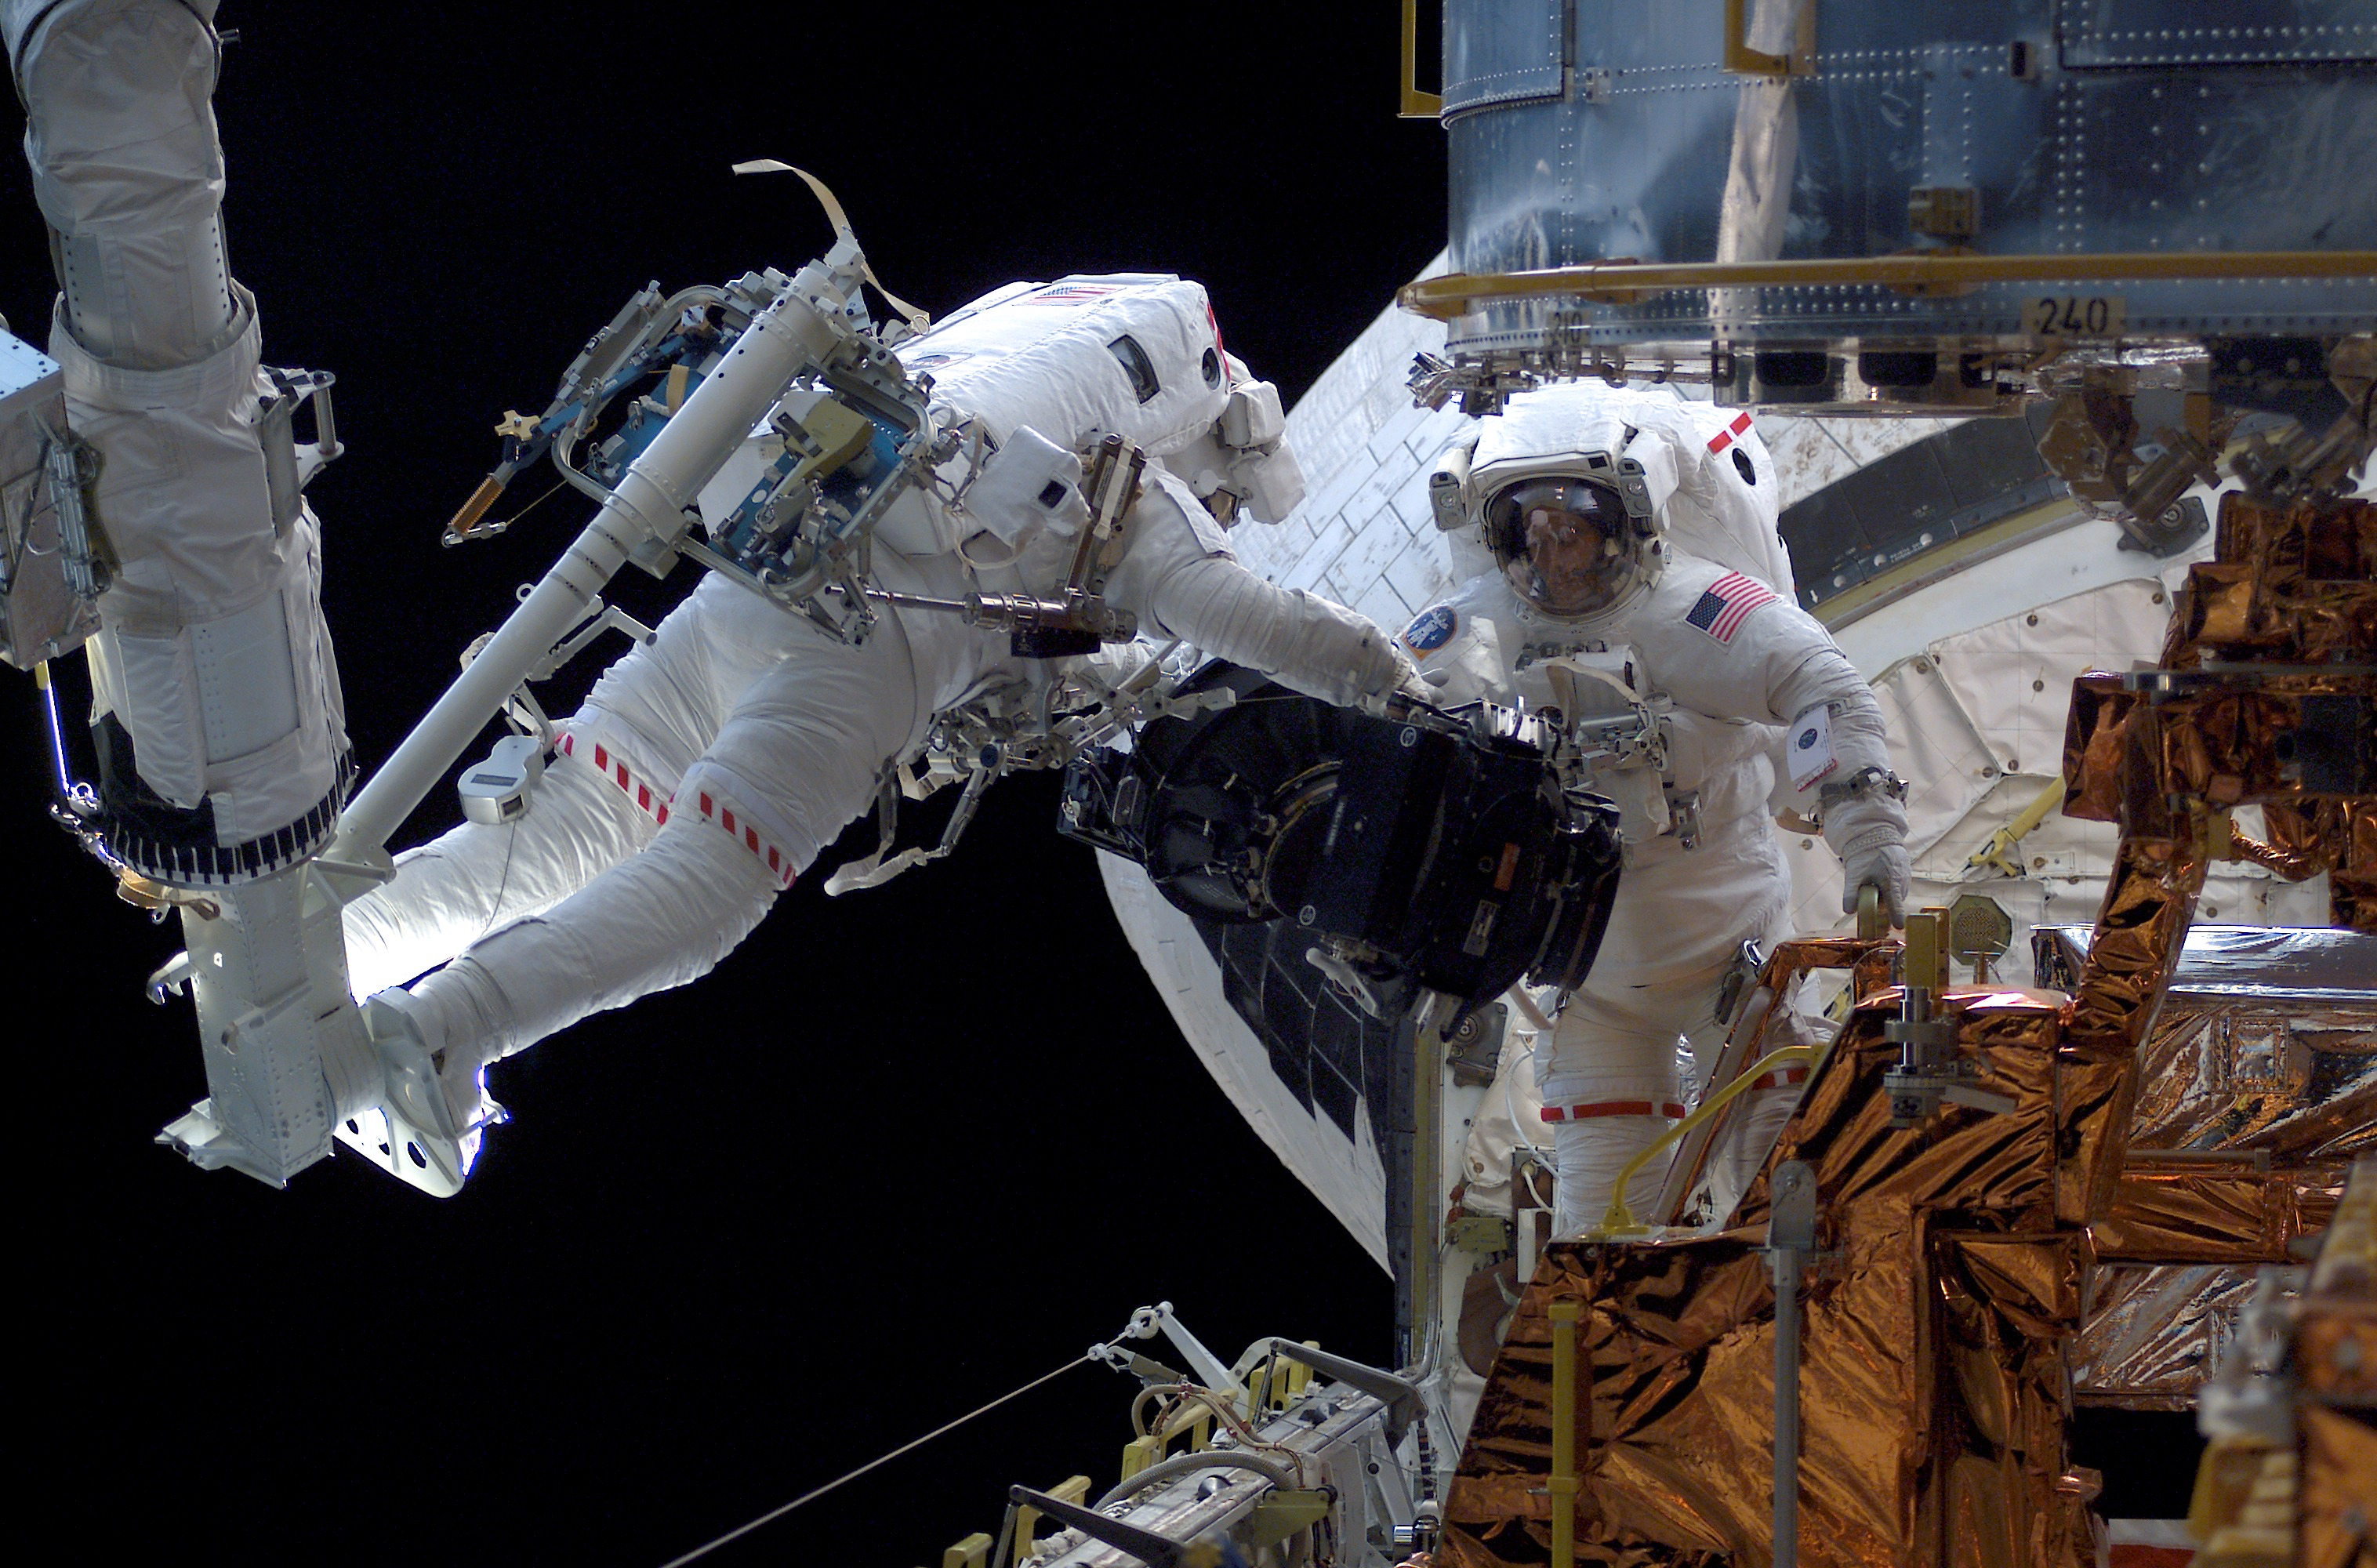 One astronauts hand some telescope hardware to another in the cargo bay.